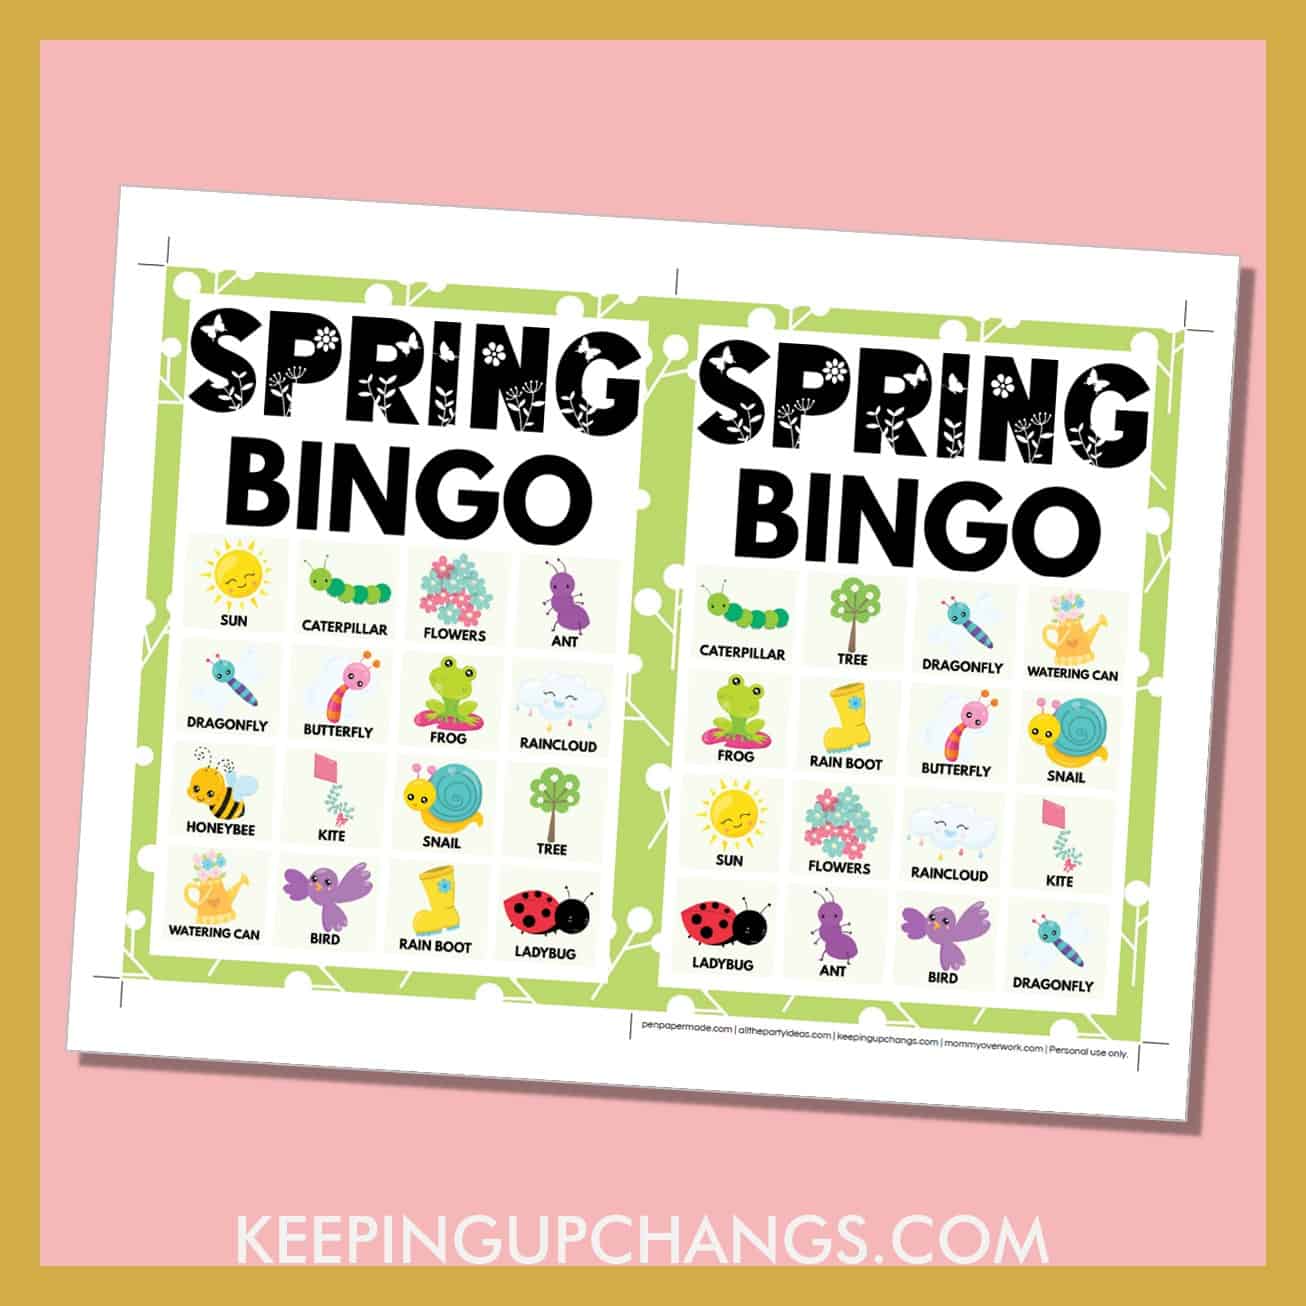 free spring bingo card 4x4 5x7 game boards with images and text words.